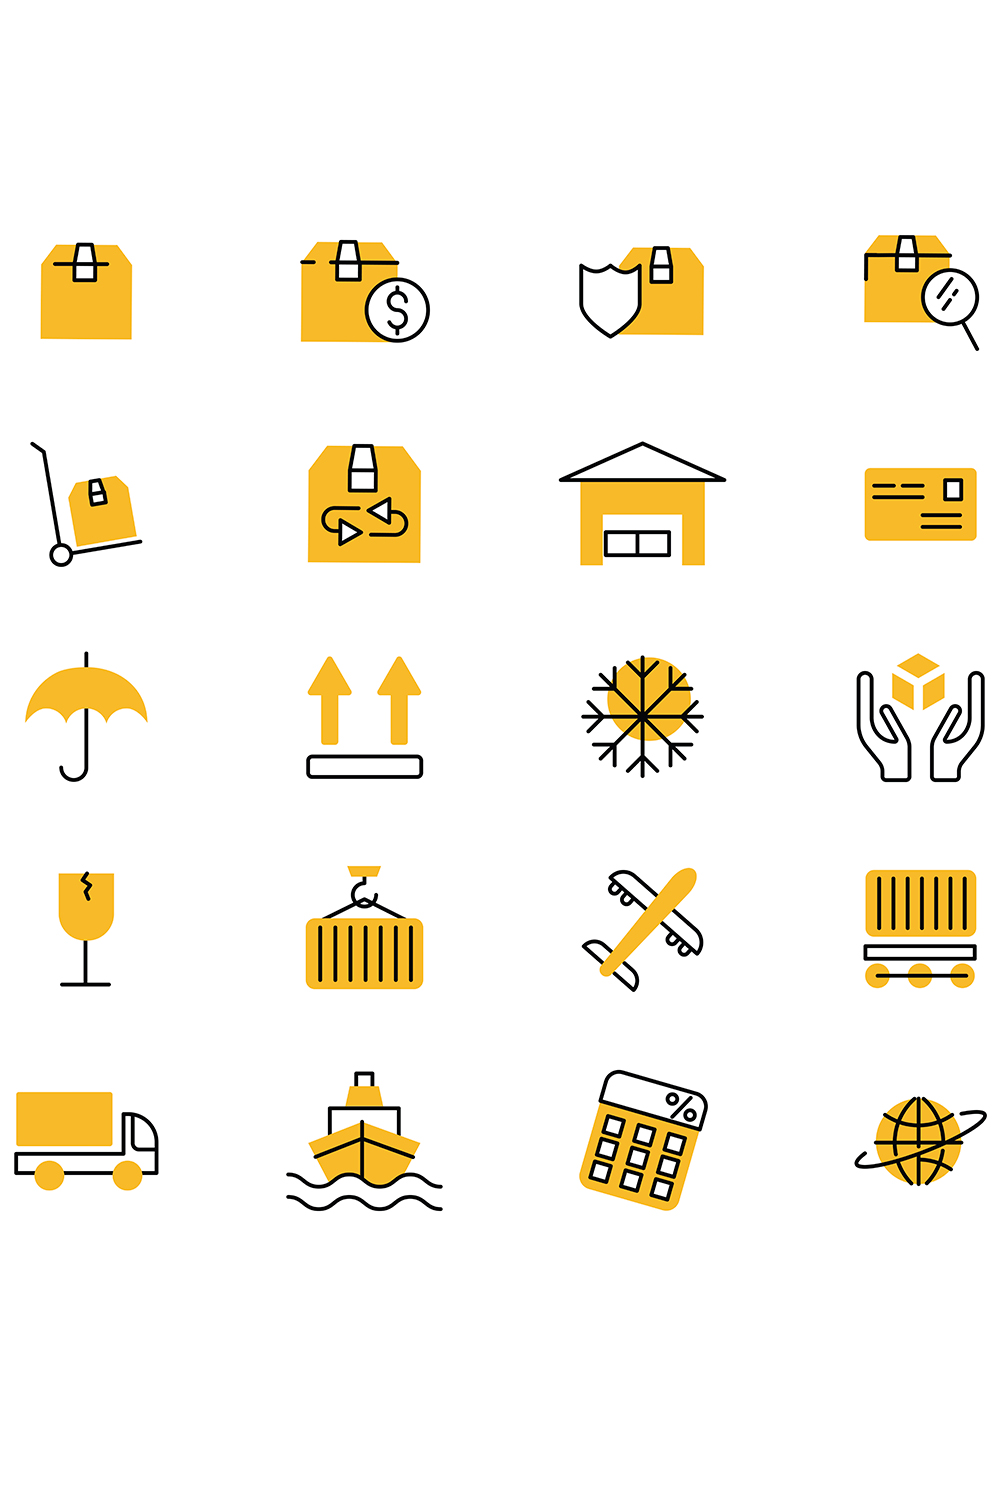 Bunch of different types of icons on a white background.